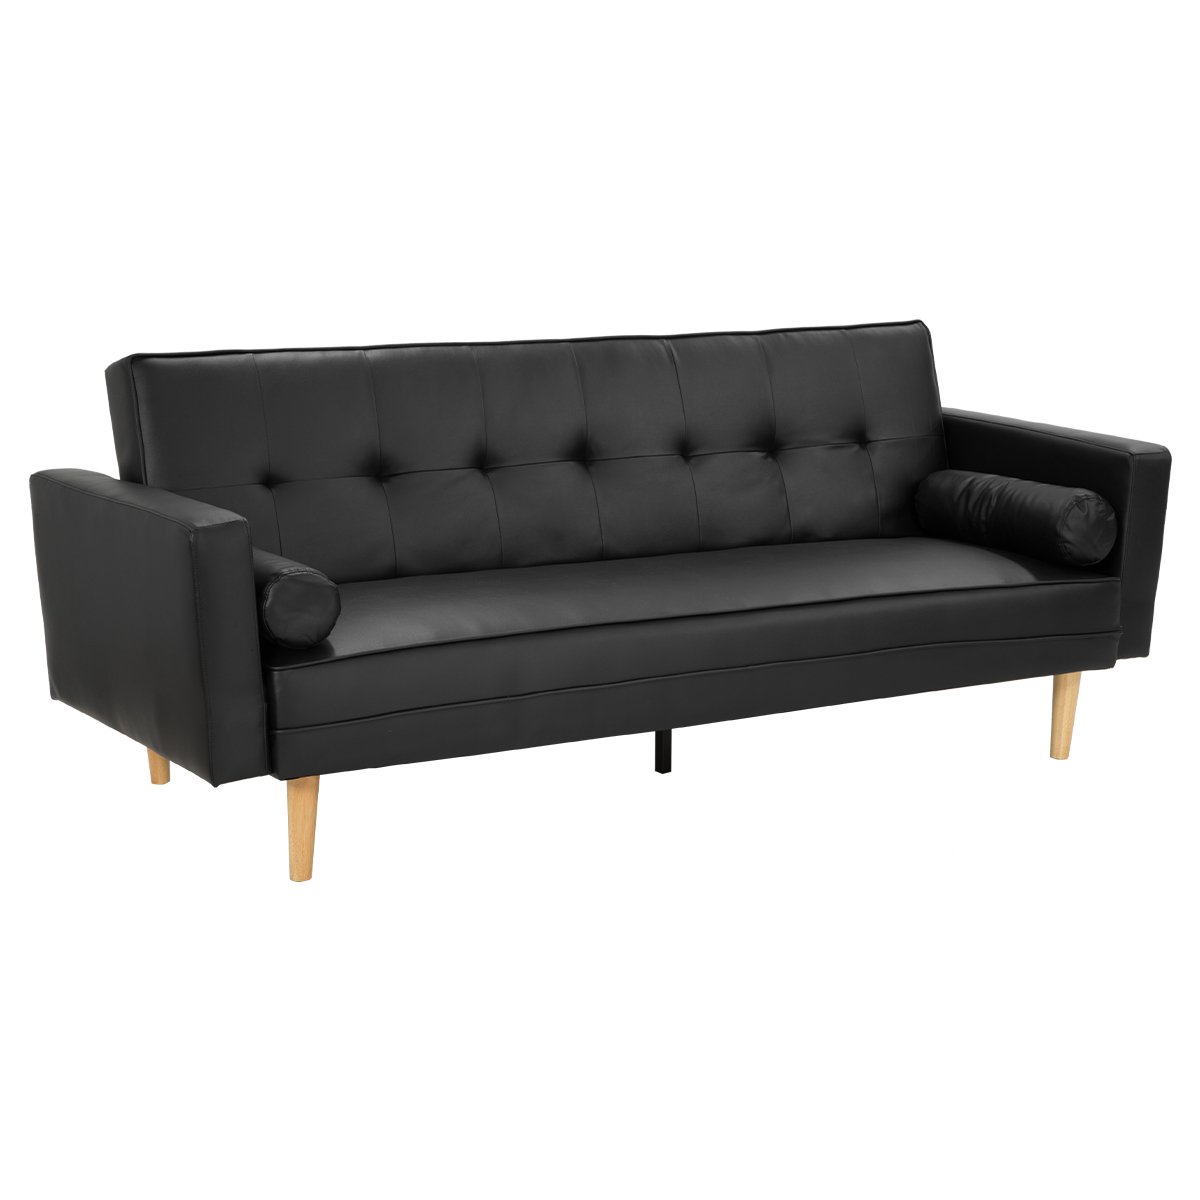 Sarantino 3 Seater Faux Leather Sofa Bed Couch with Pillows - Black 1